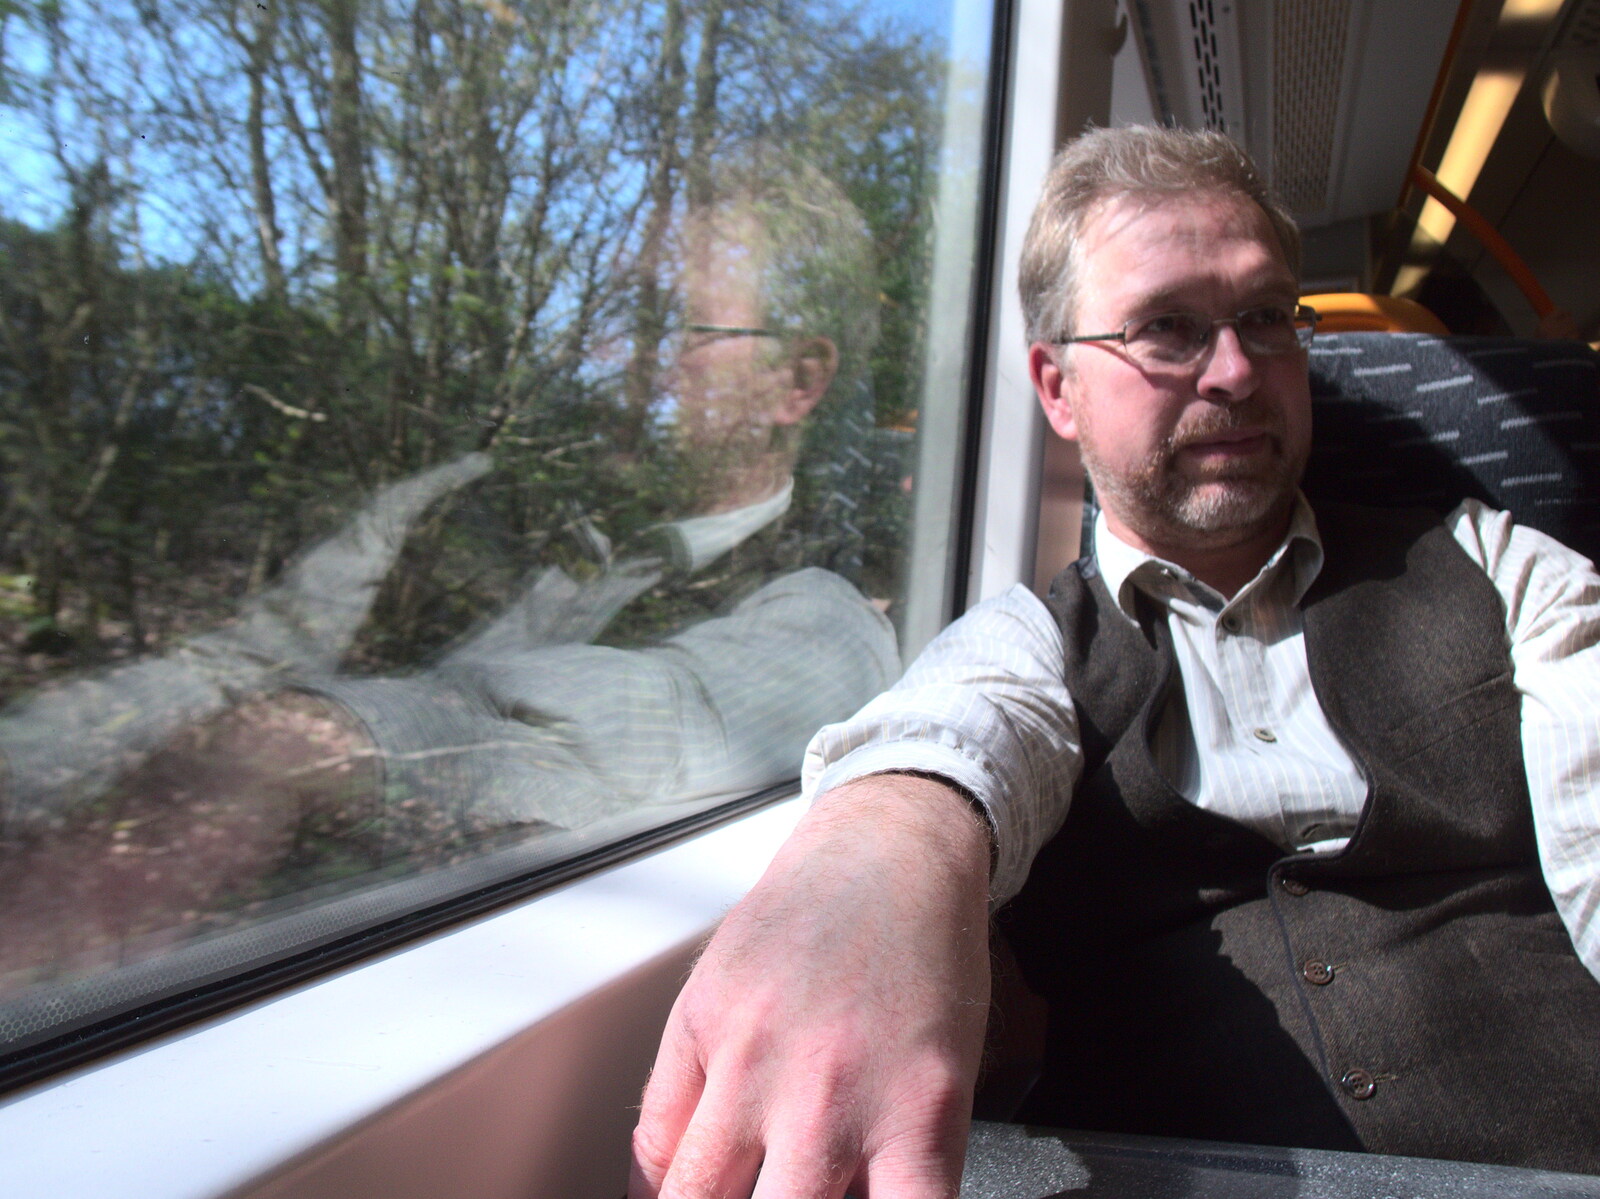 Marc on the train from The East Anglian Beer Festival, Bury St. Edmunds, Suffolk - 21st April 2018